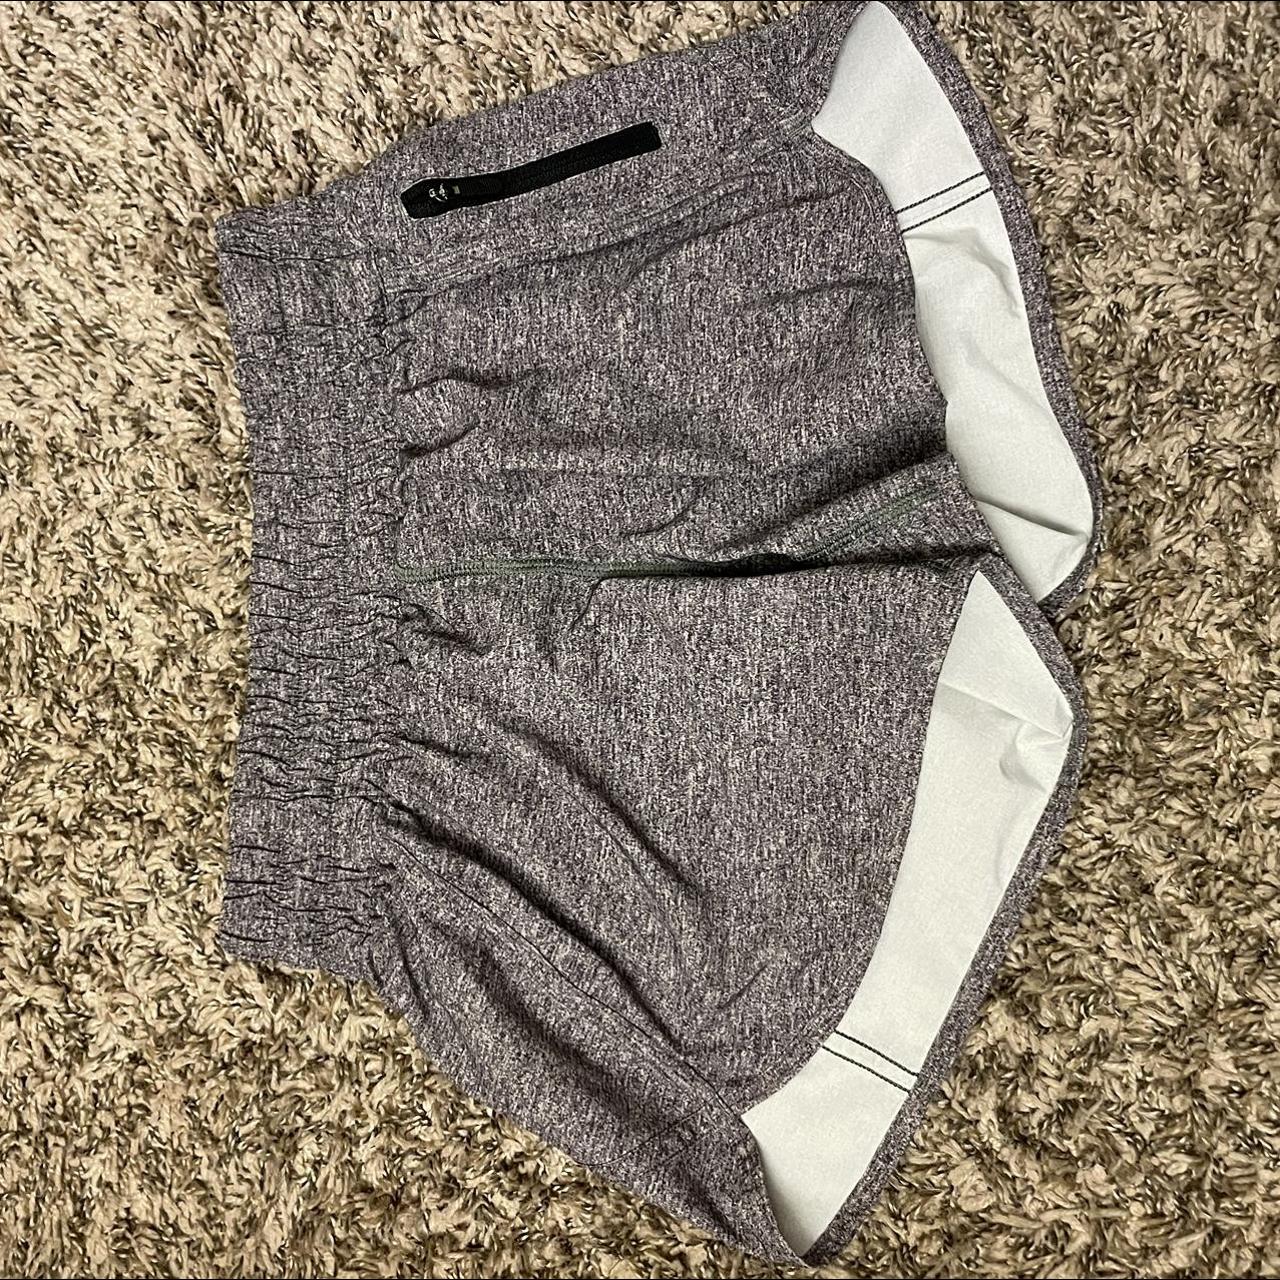 lululemon shorts size 4, worn twice with no signs of